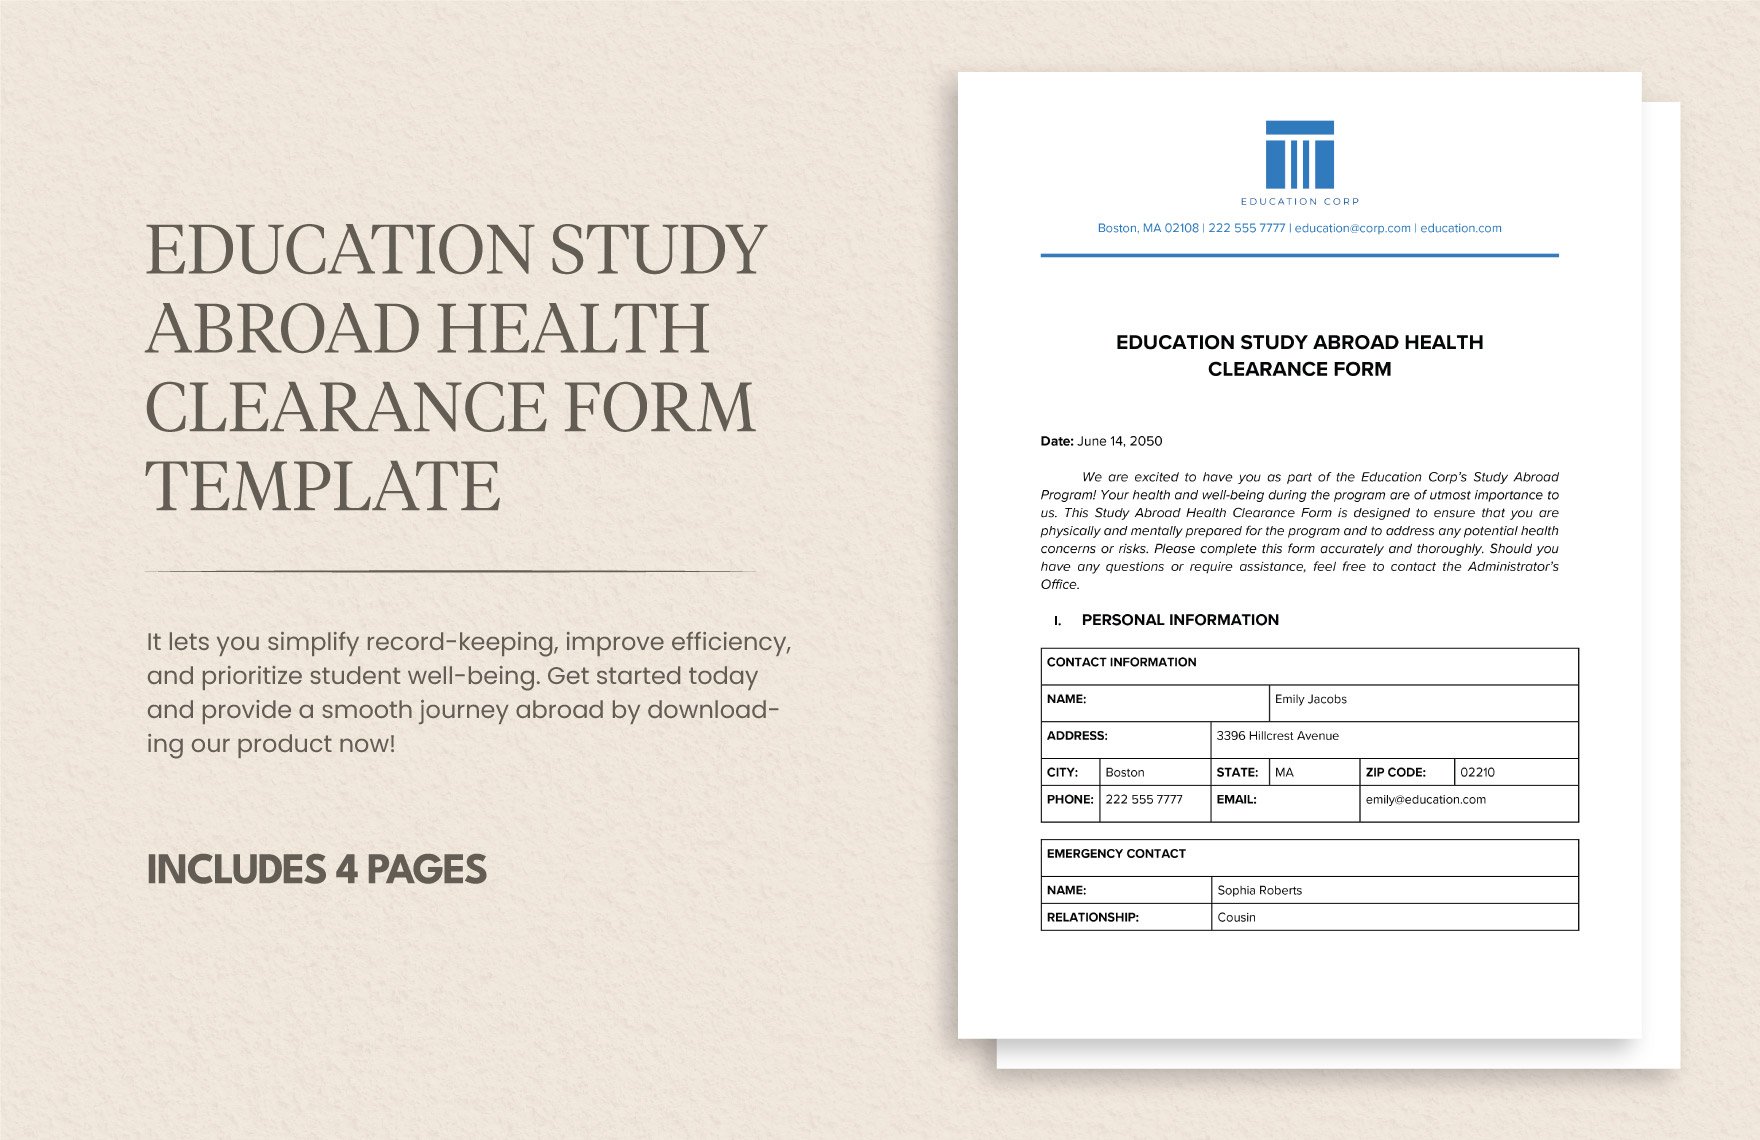 Education Study Abroad Health Clearance Form Template in Word, Google Docs, PDF